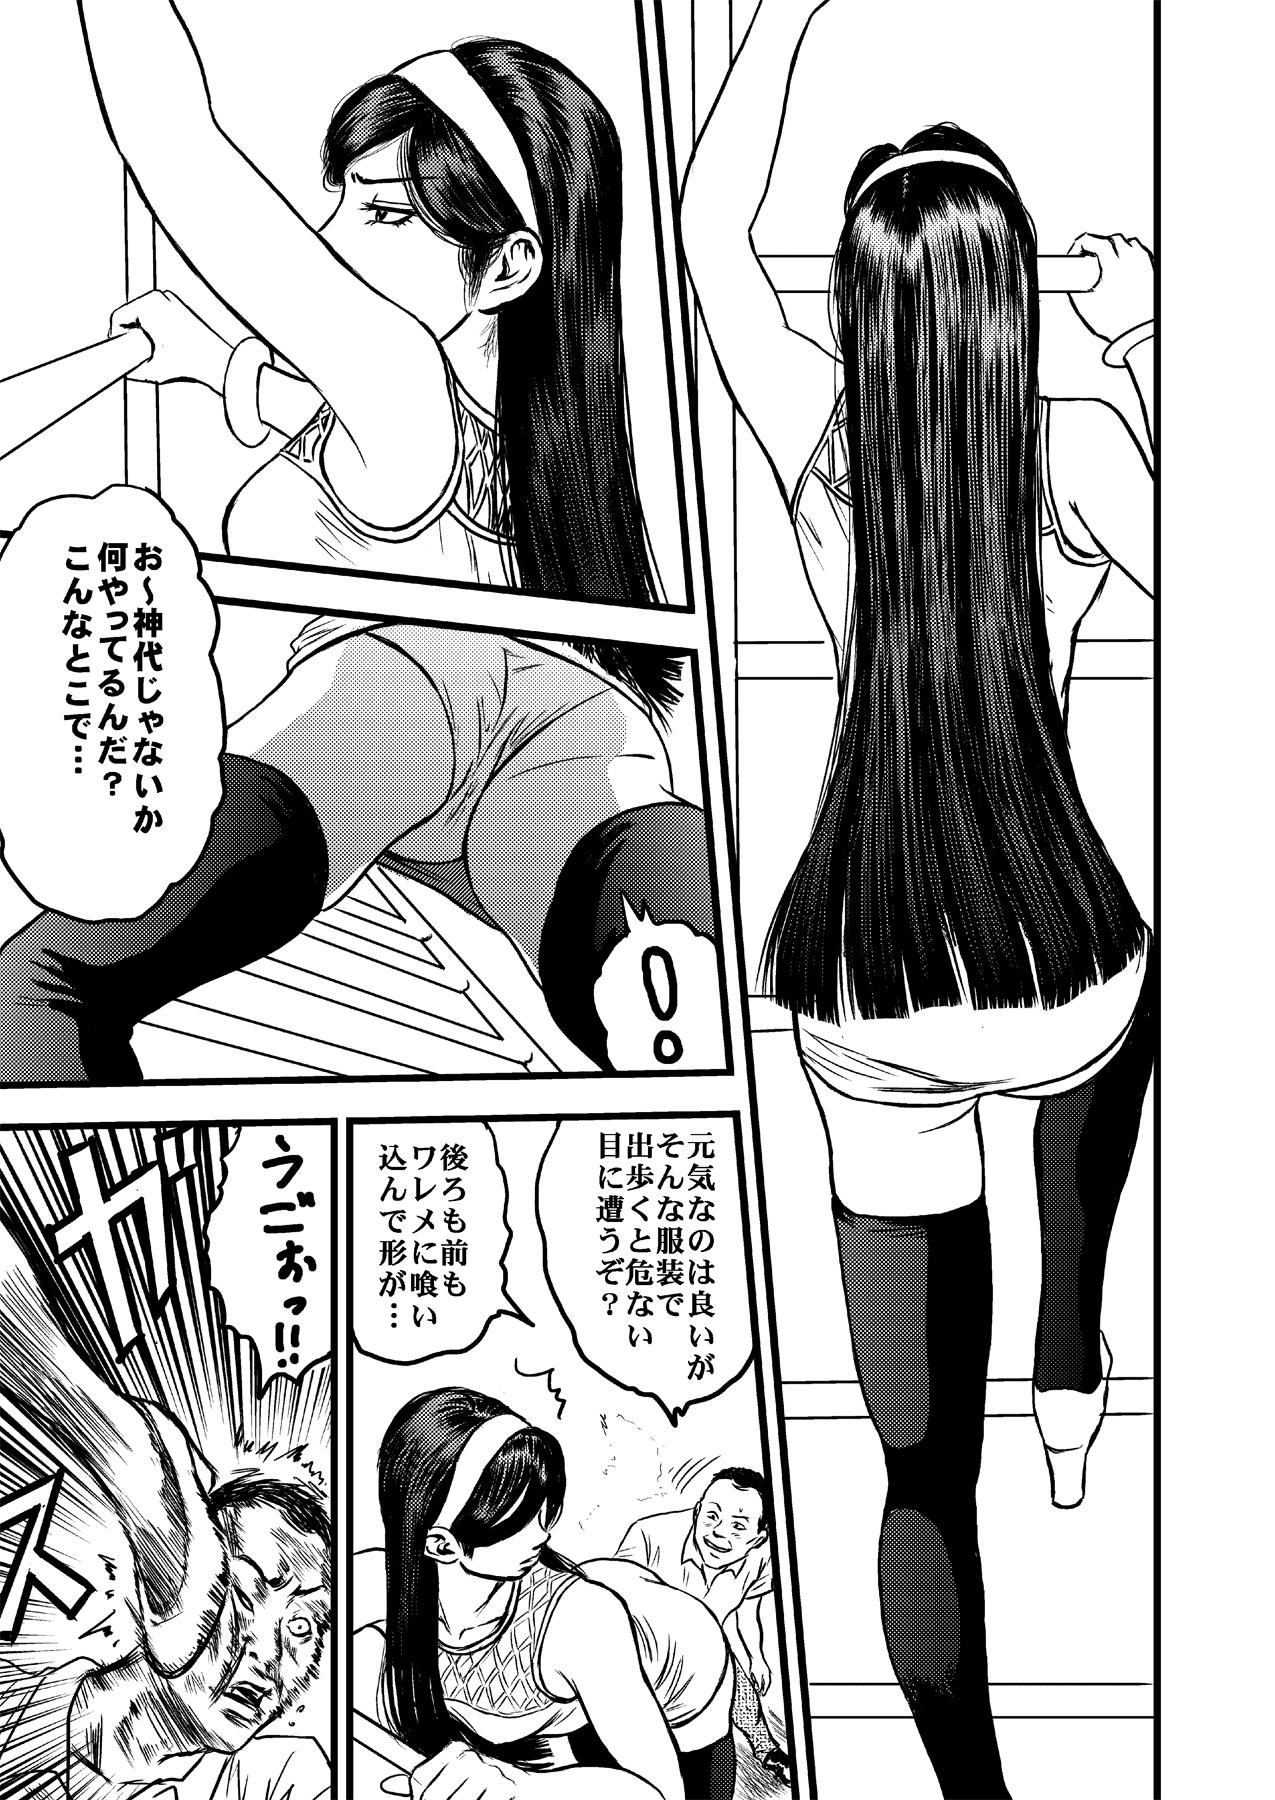 Nylons Occult Ojousama no Yuuutsu - Occult academy Men - Page 5